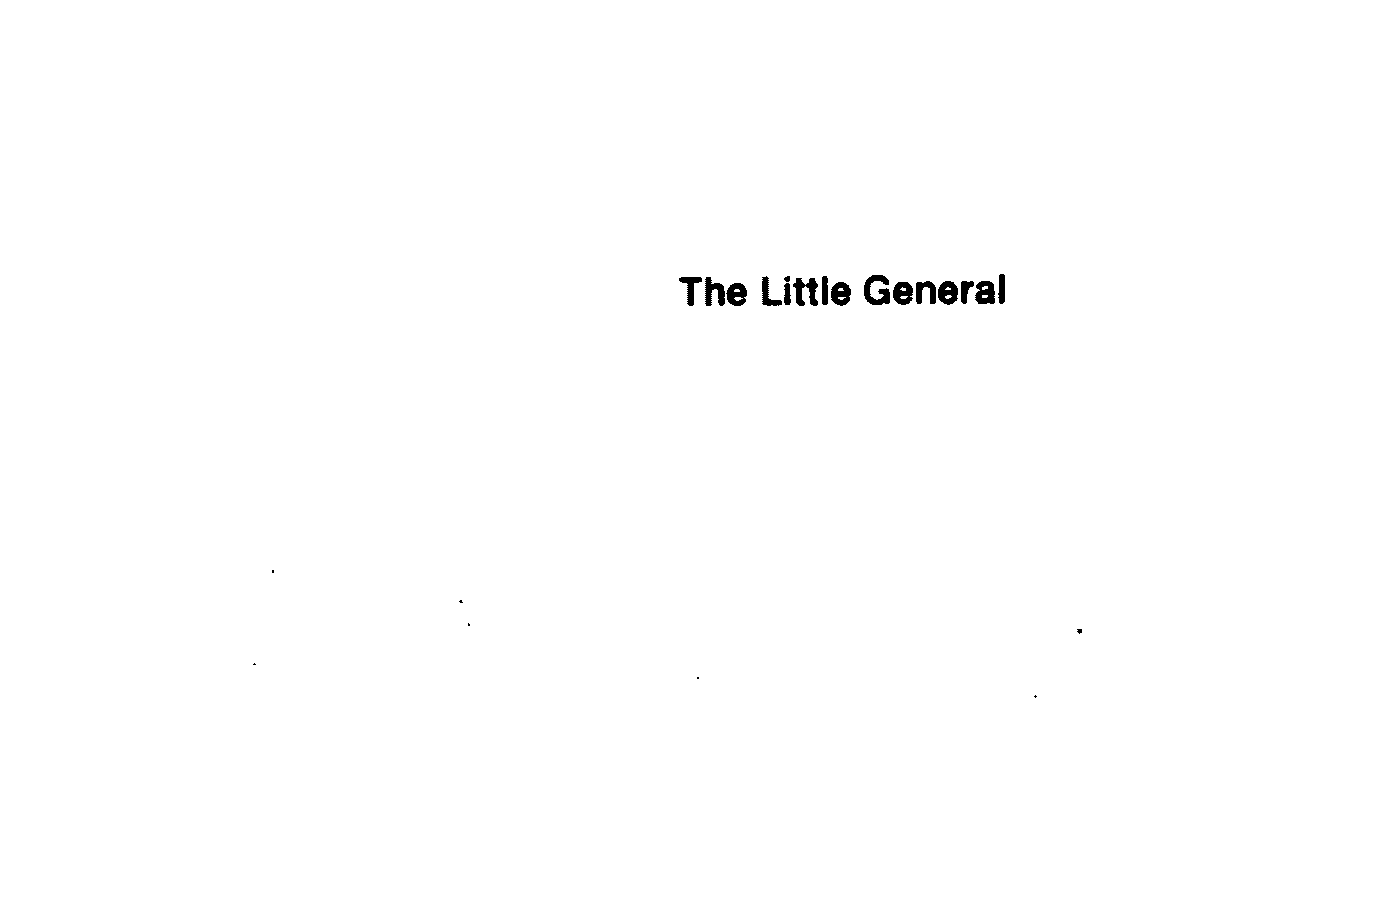  THE LITTLE GENERAL